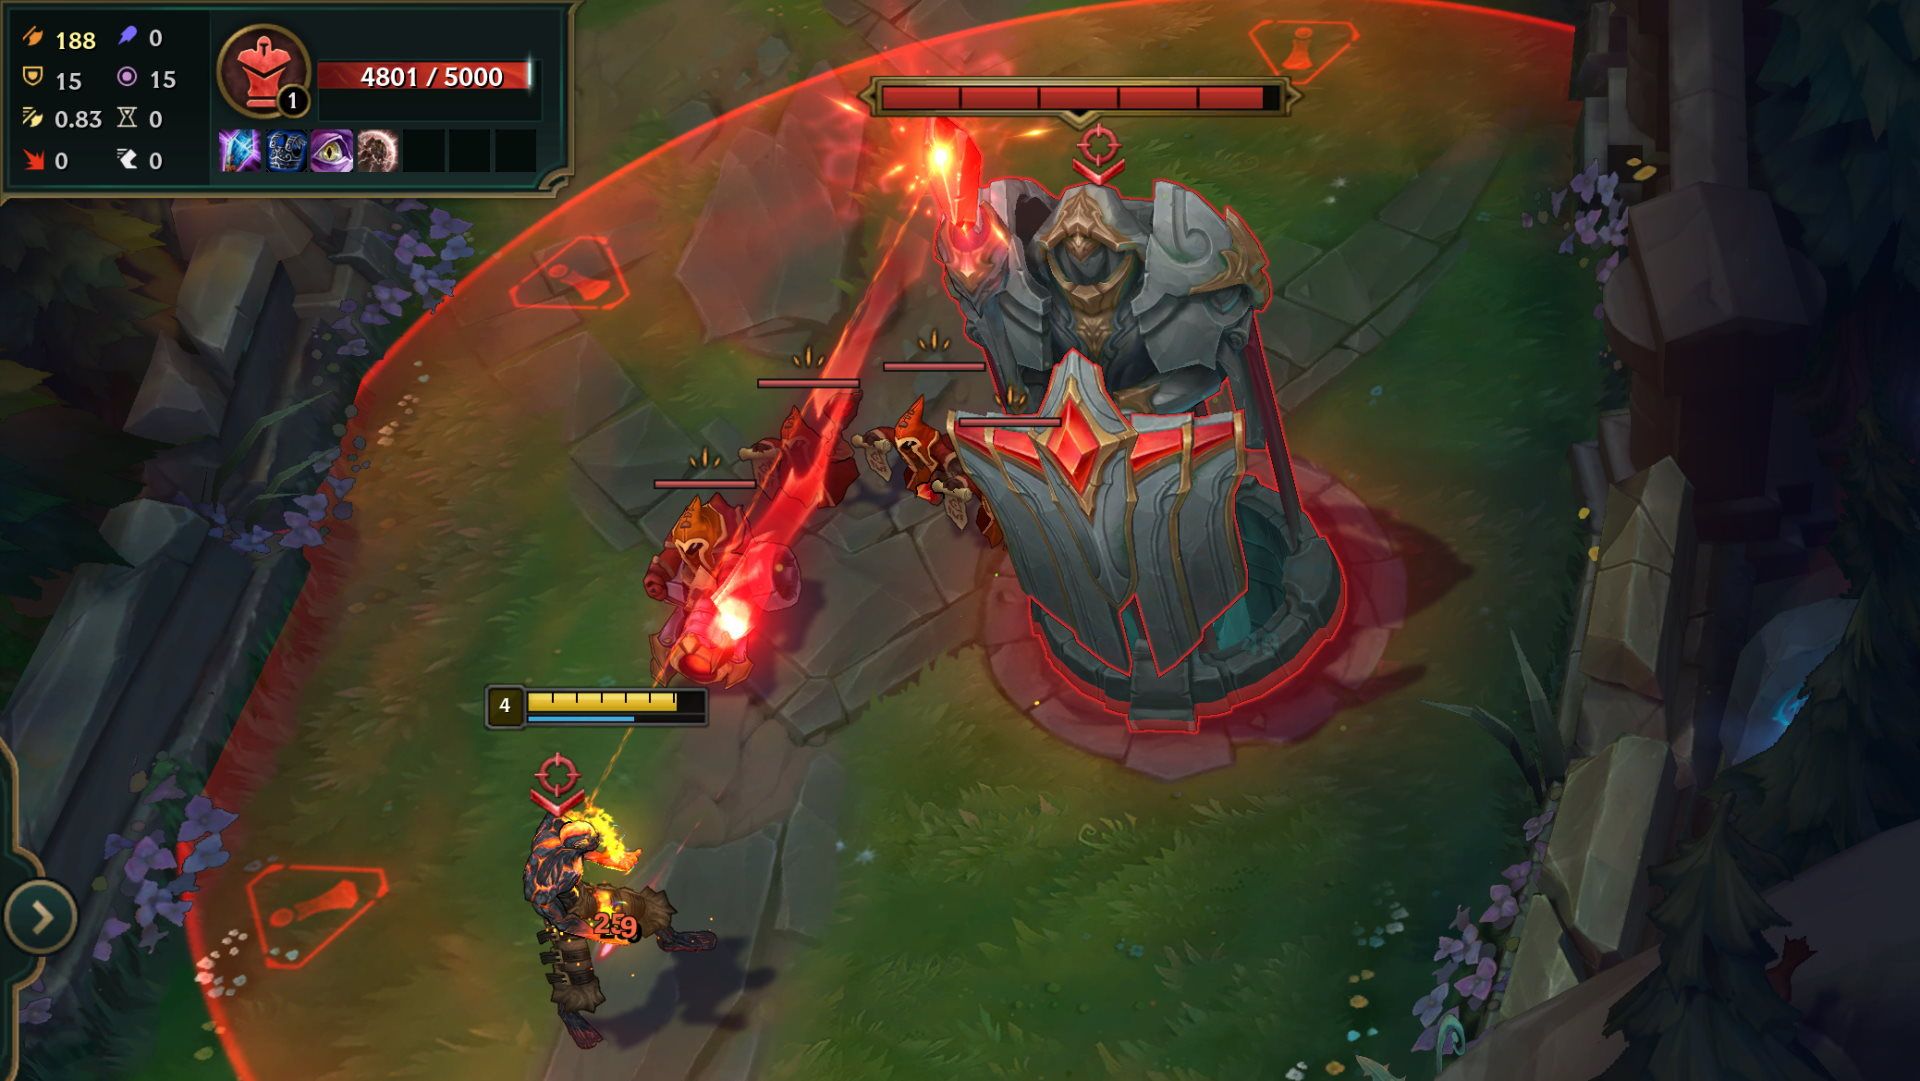 Champion Brand is attacked by the tier 1 tower in League of Legends.